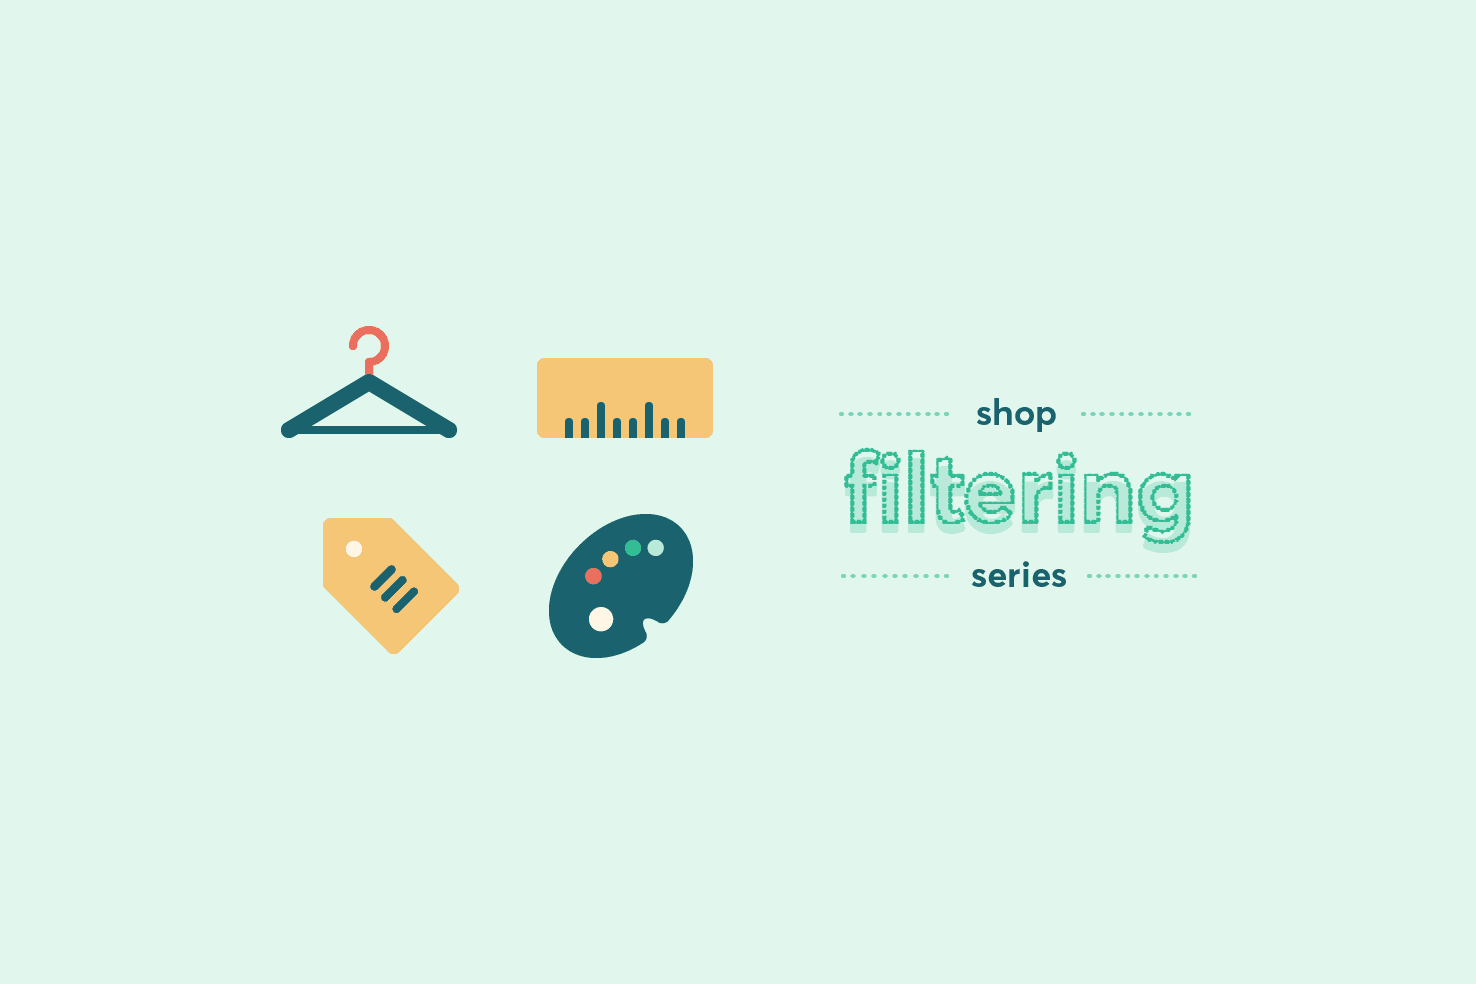 Shop filter series: completing the filters (featured image)